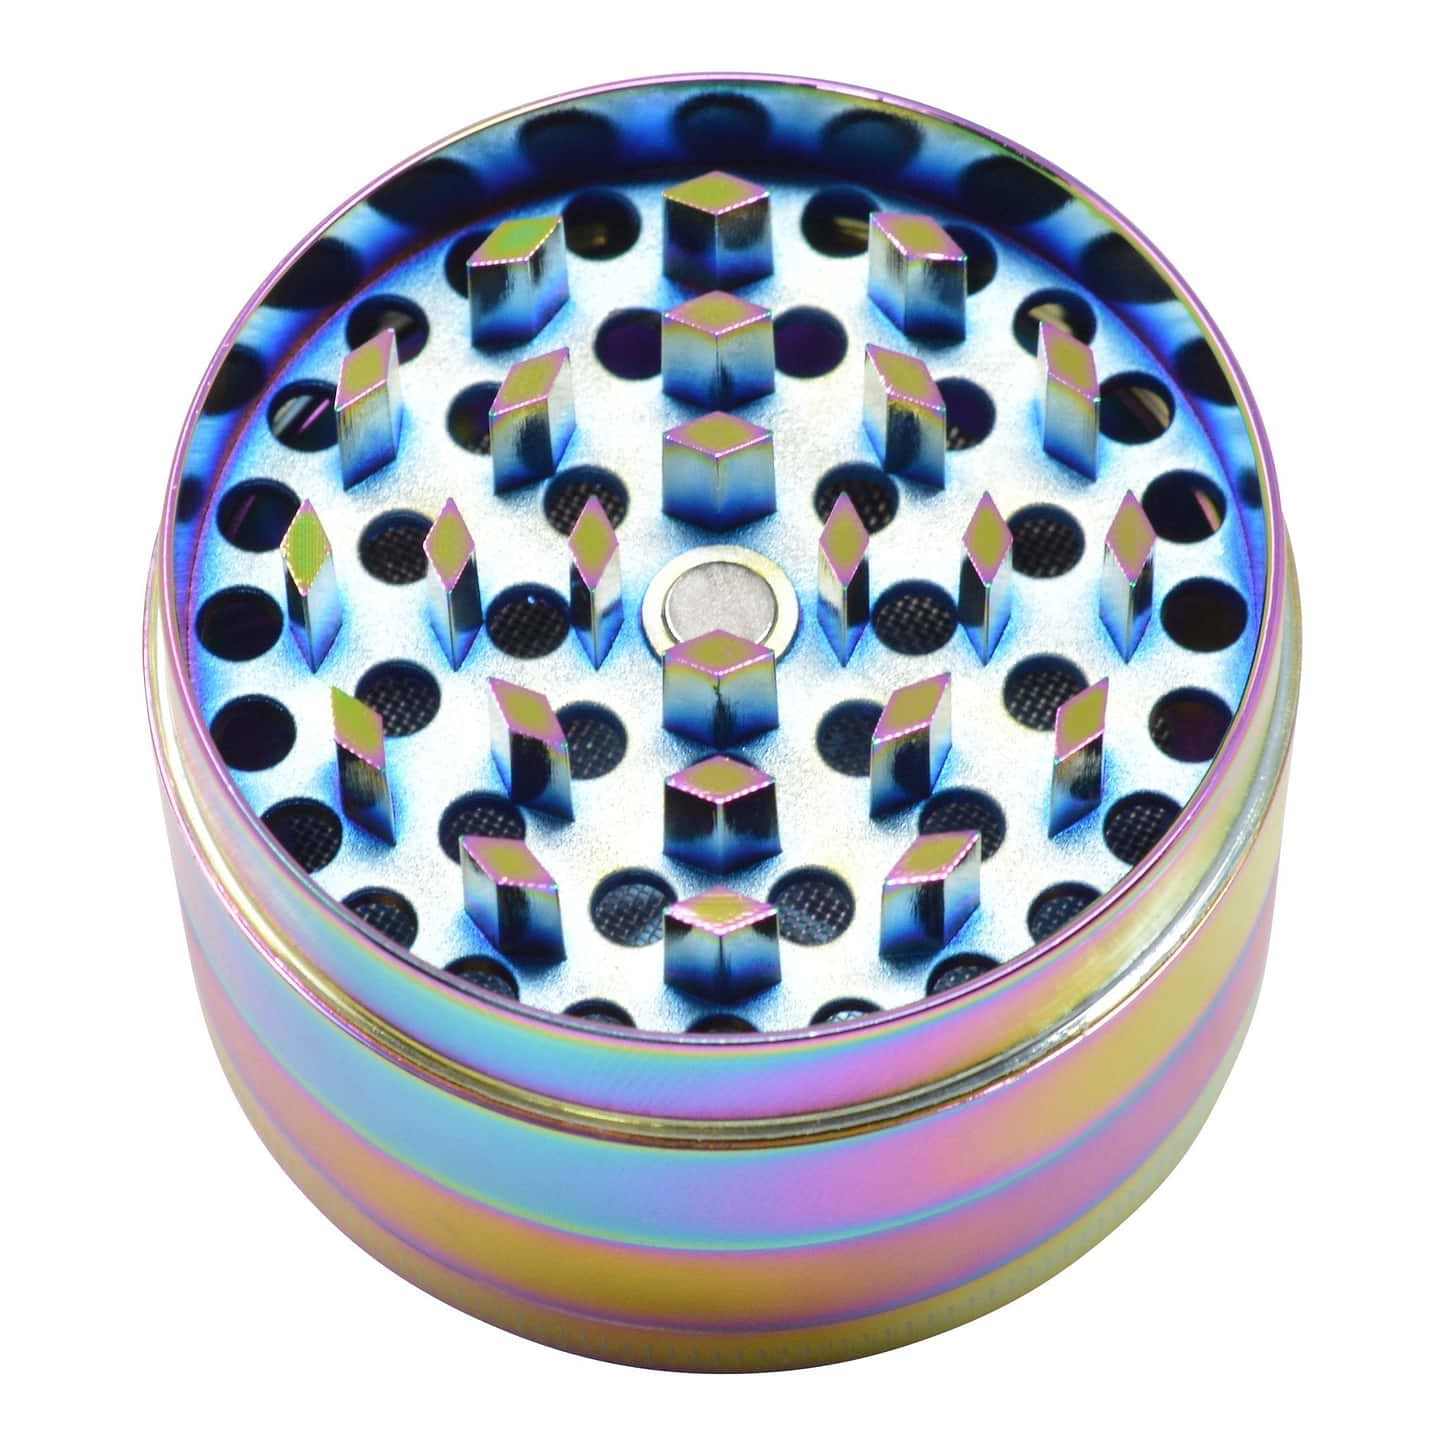 Full shot of the scraper of the 4-piece shiny hologram rainbow colored 48mm metal grinder skull design